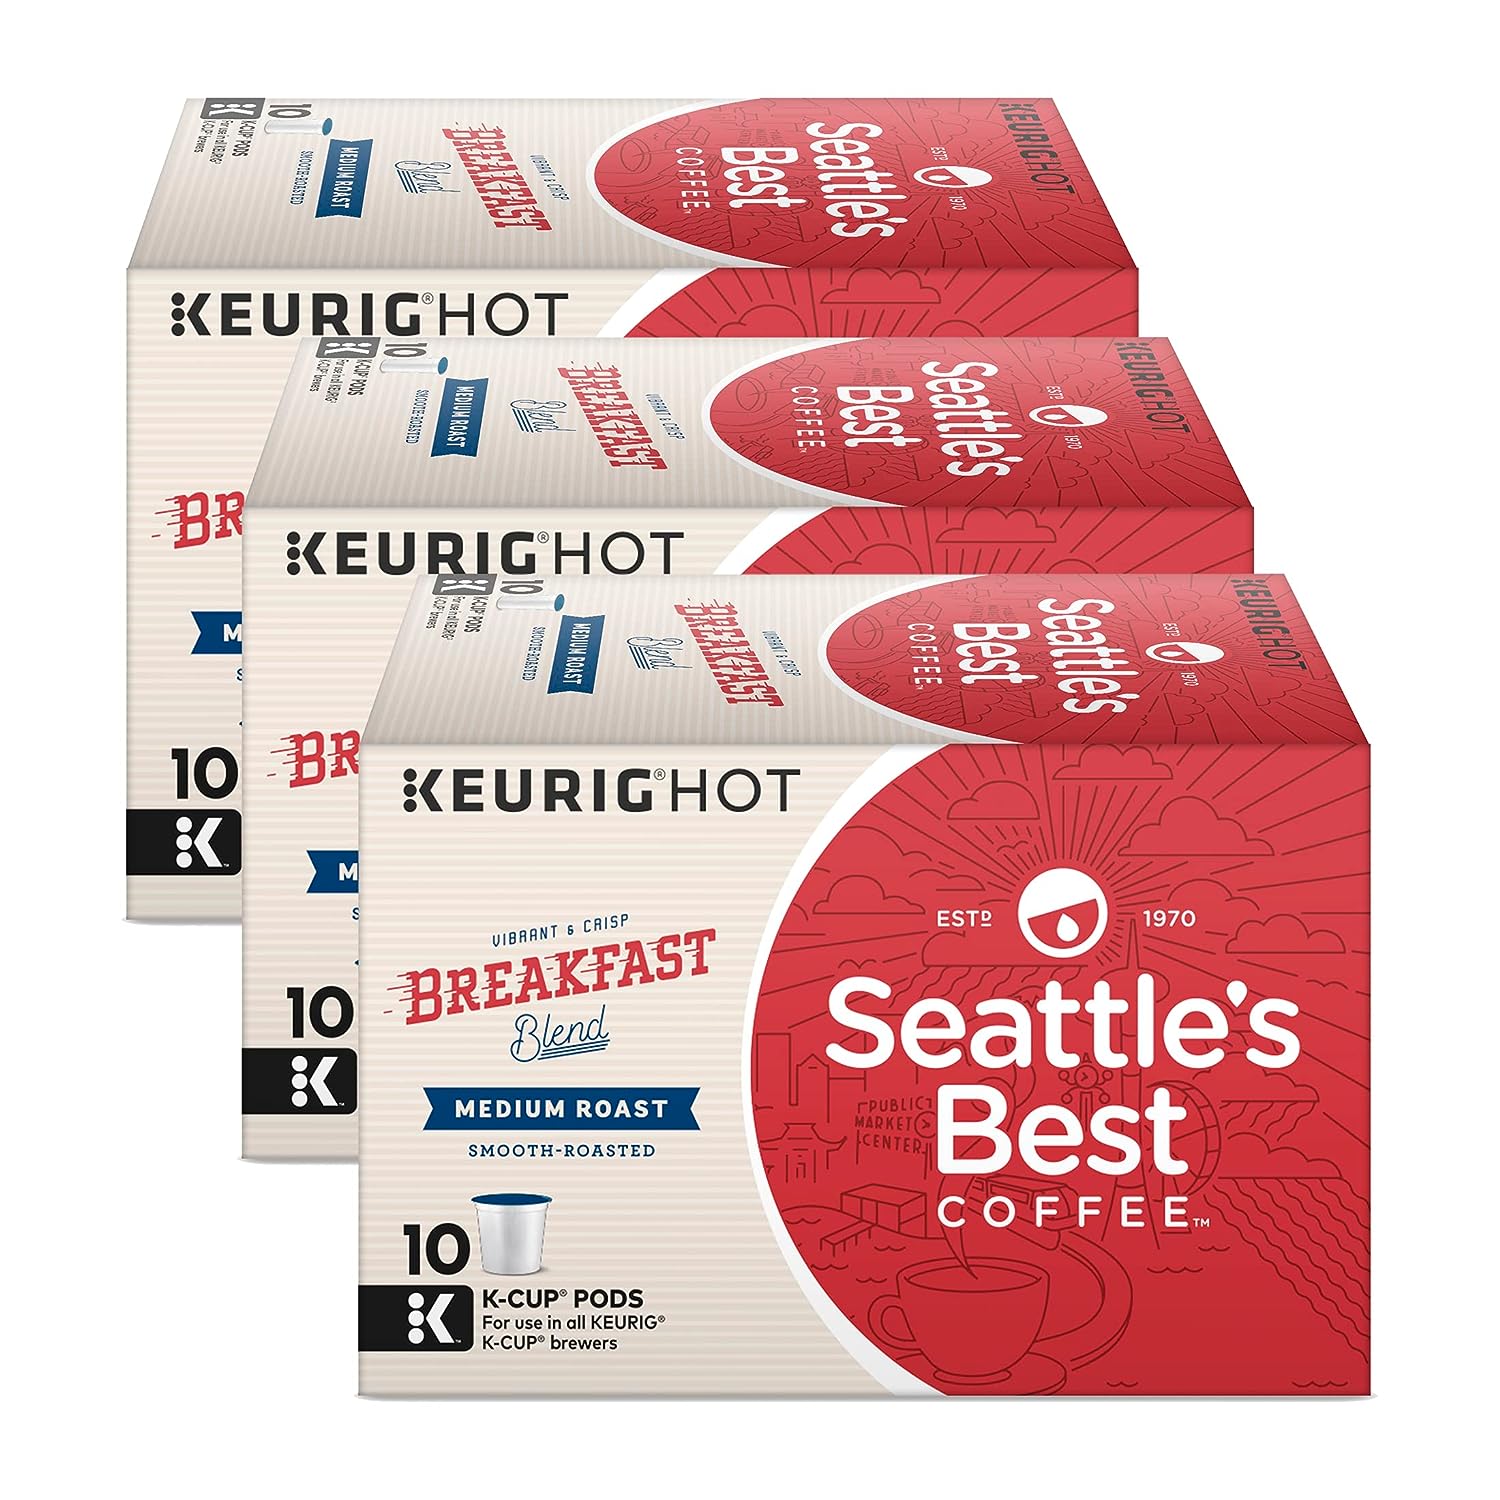 Seattle’s Best Coffee K-Cup Pods, Breakfast Blend, Medium Roast Coffee, Smooth-Roasted K-Cups for Keurig K-Cup Brewers, 10 CT K-Cups/Box (Pack of 3 Boxes)